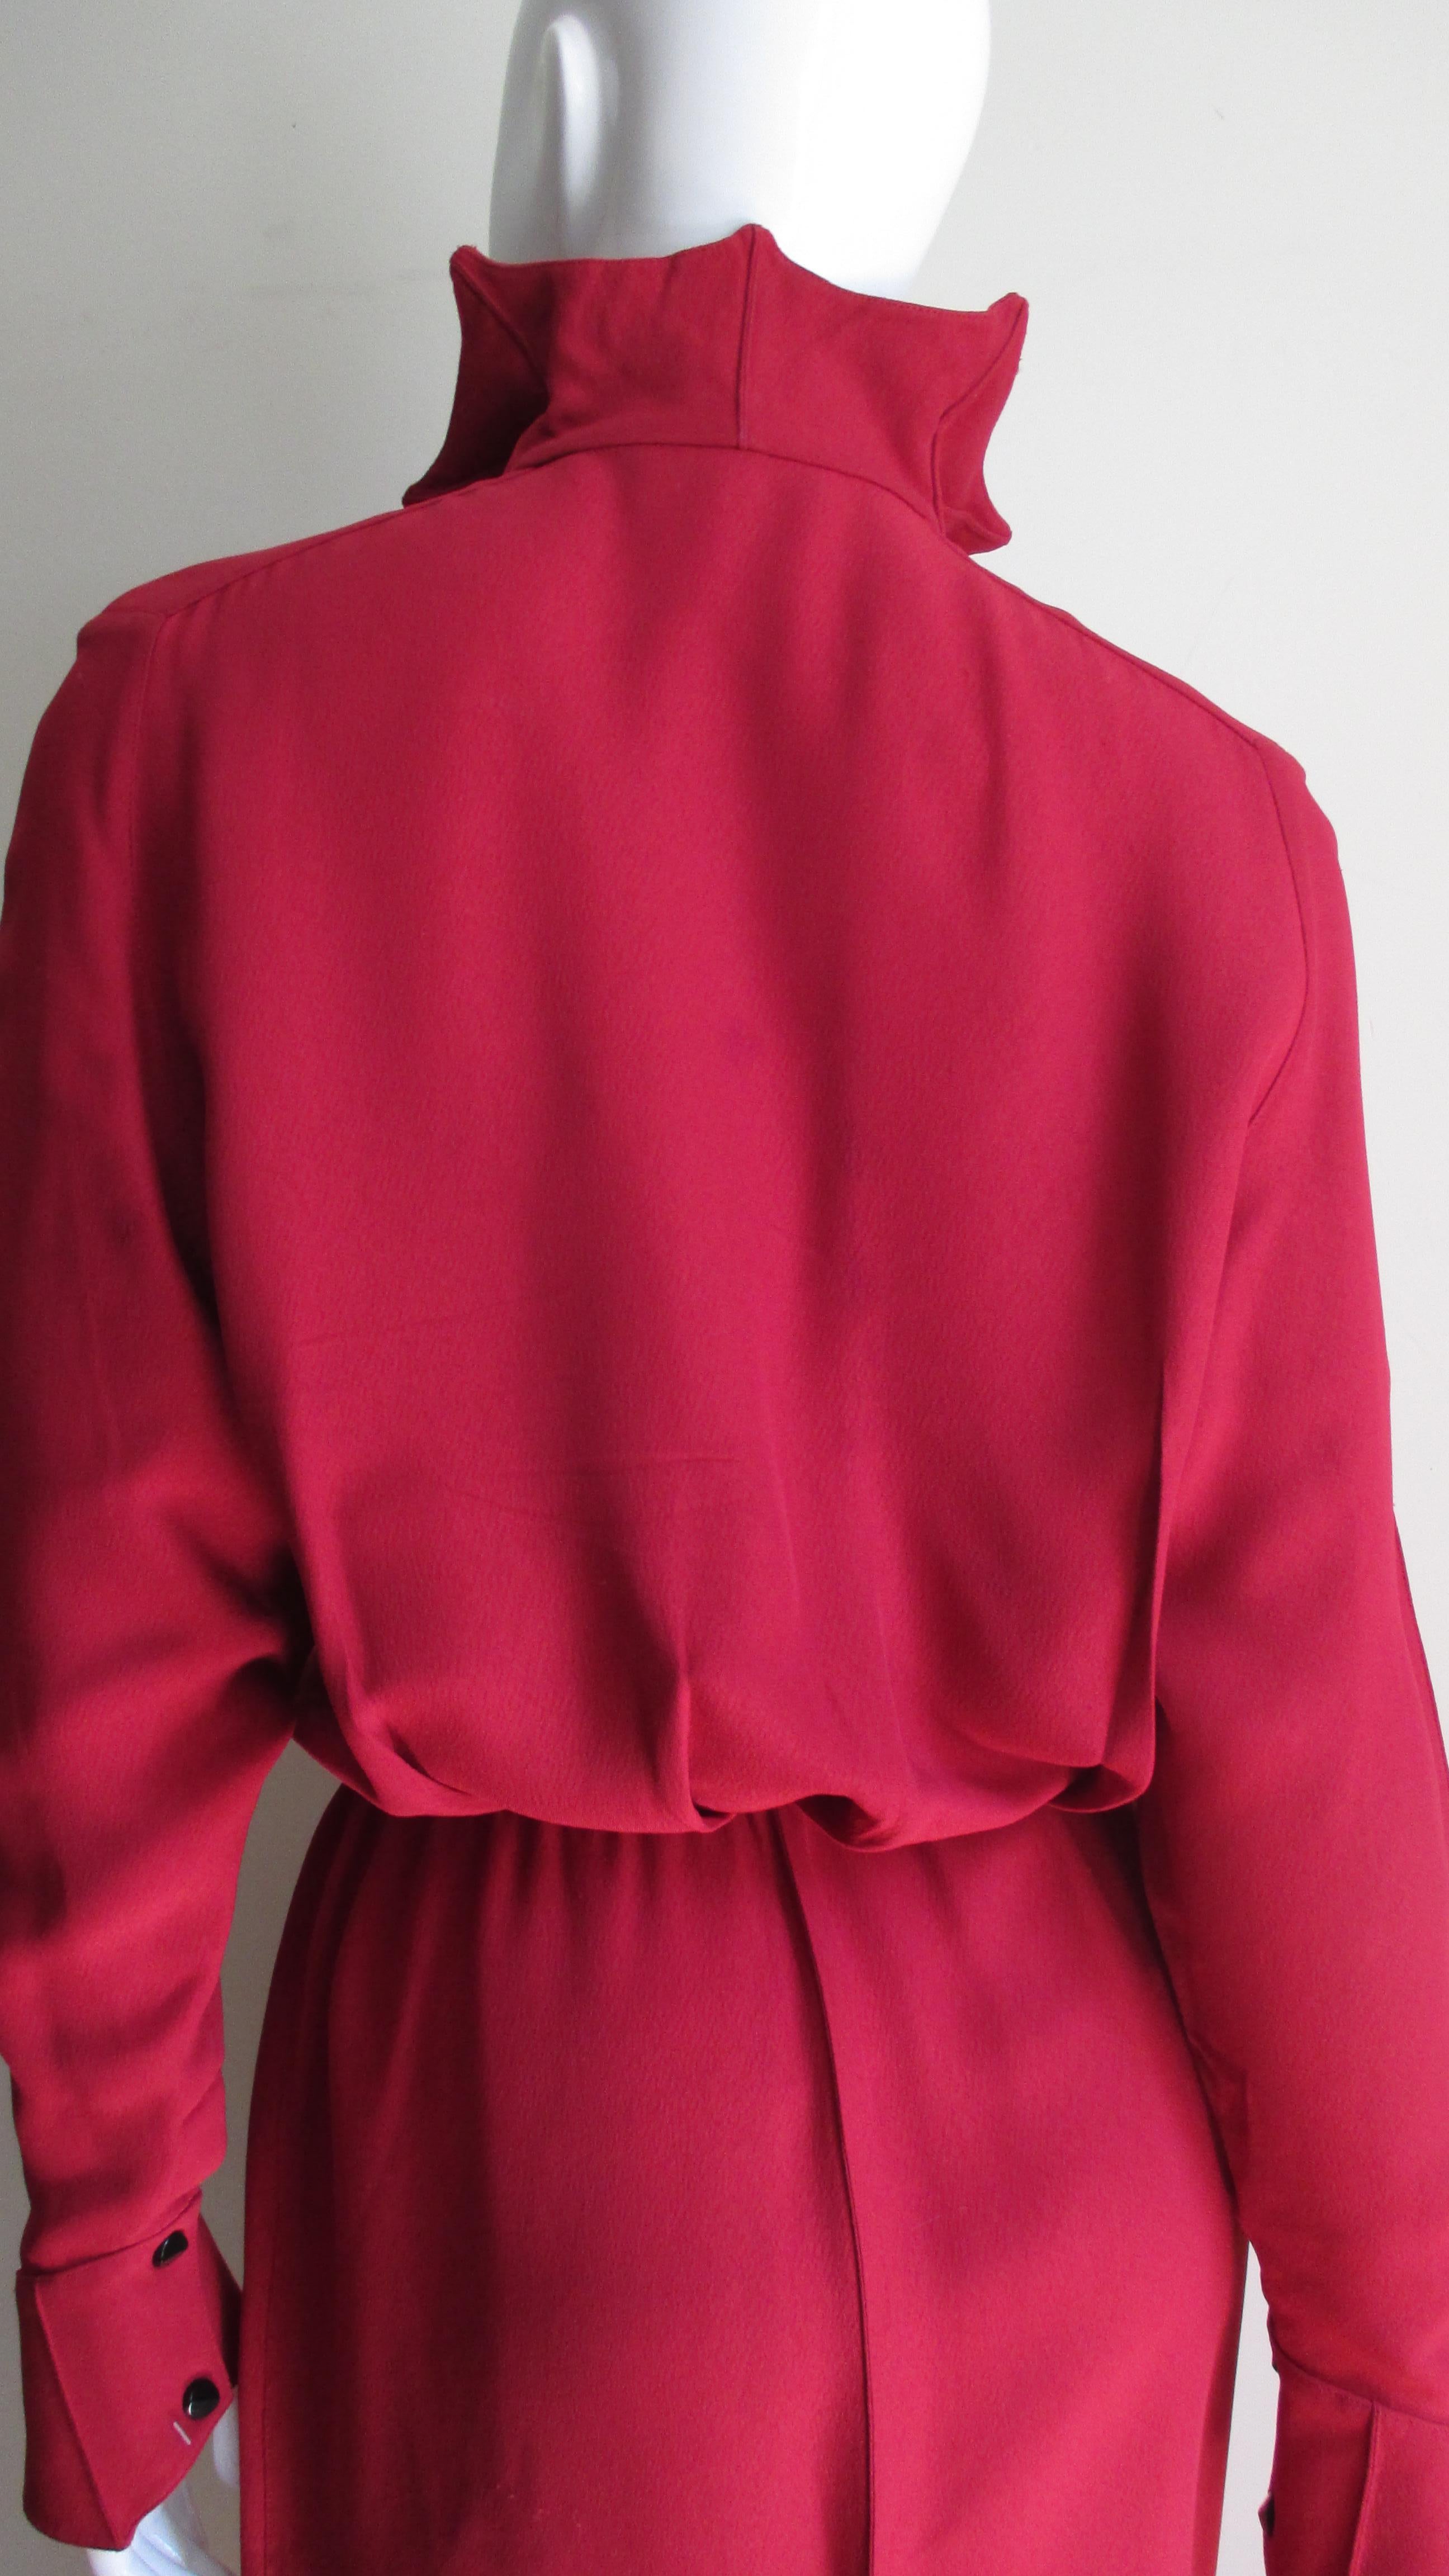 Thierry Mugler Dress with Pointed Collar and Cuffs 1980s For Sale 7